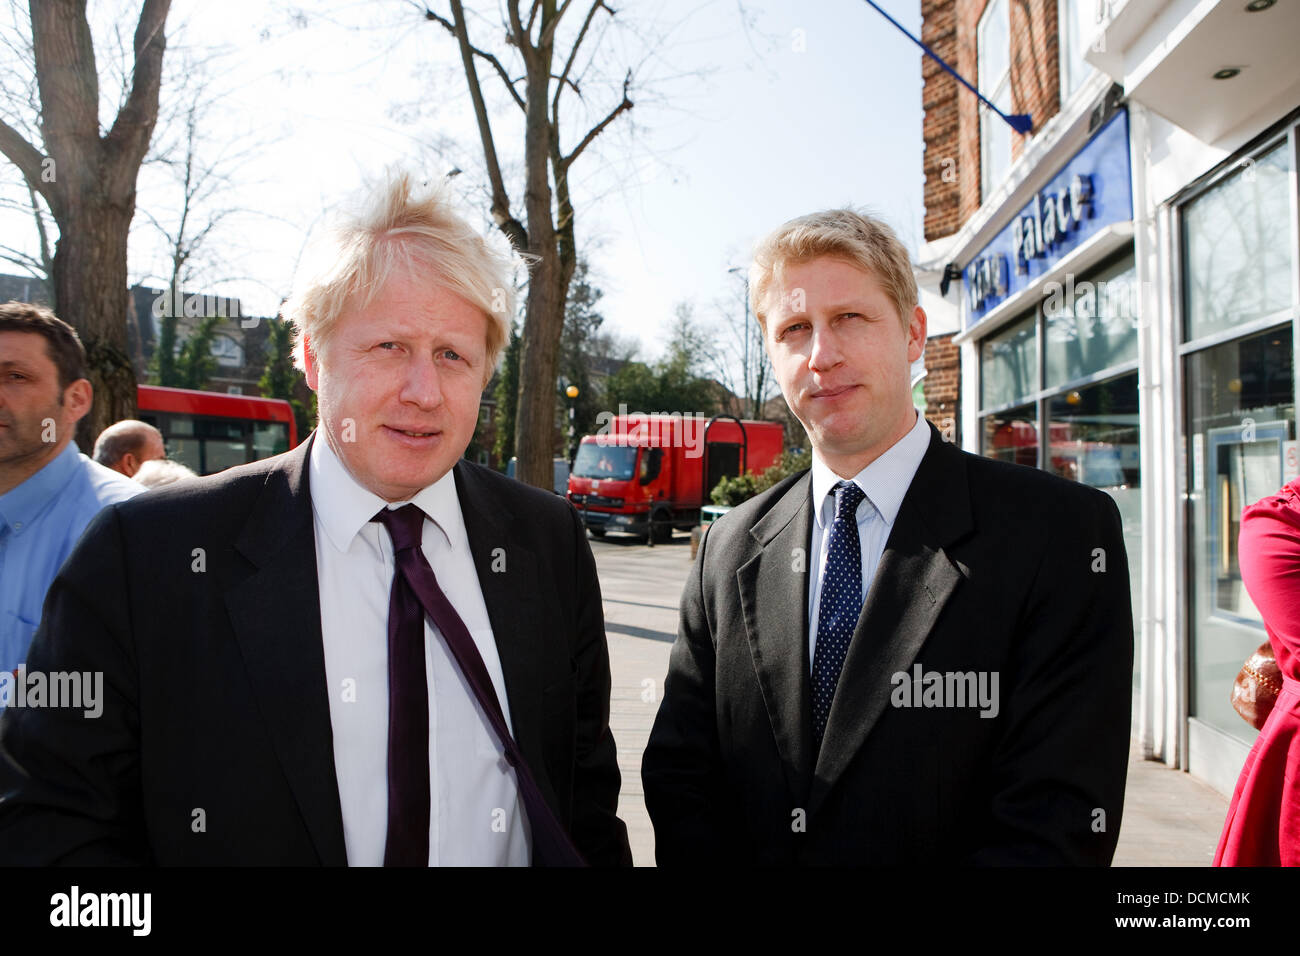 Boris Johnson has suggested that it is “very likely” that his brother will become the Prime Minister - as he attacked Ed Miliband for “shafting” his brother David in the battle for the Labour leadership.  Actual photo taken Orpington,UK,12th March 2013,Boris Johnson poses with his brother Jo Johnson in Orpington high Street Stock Photo